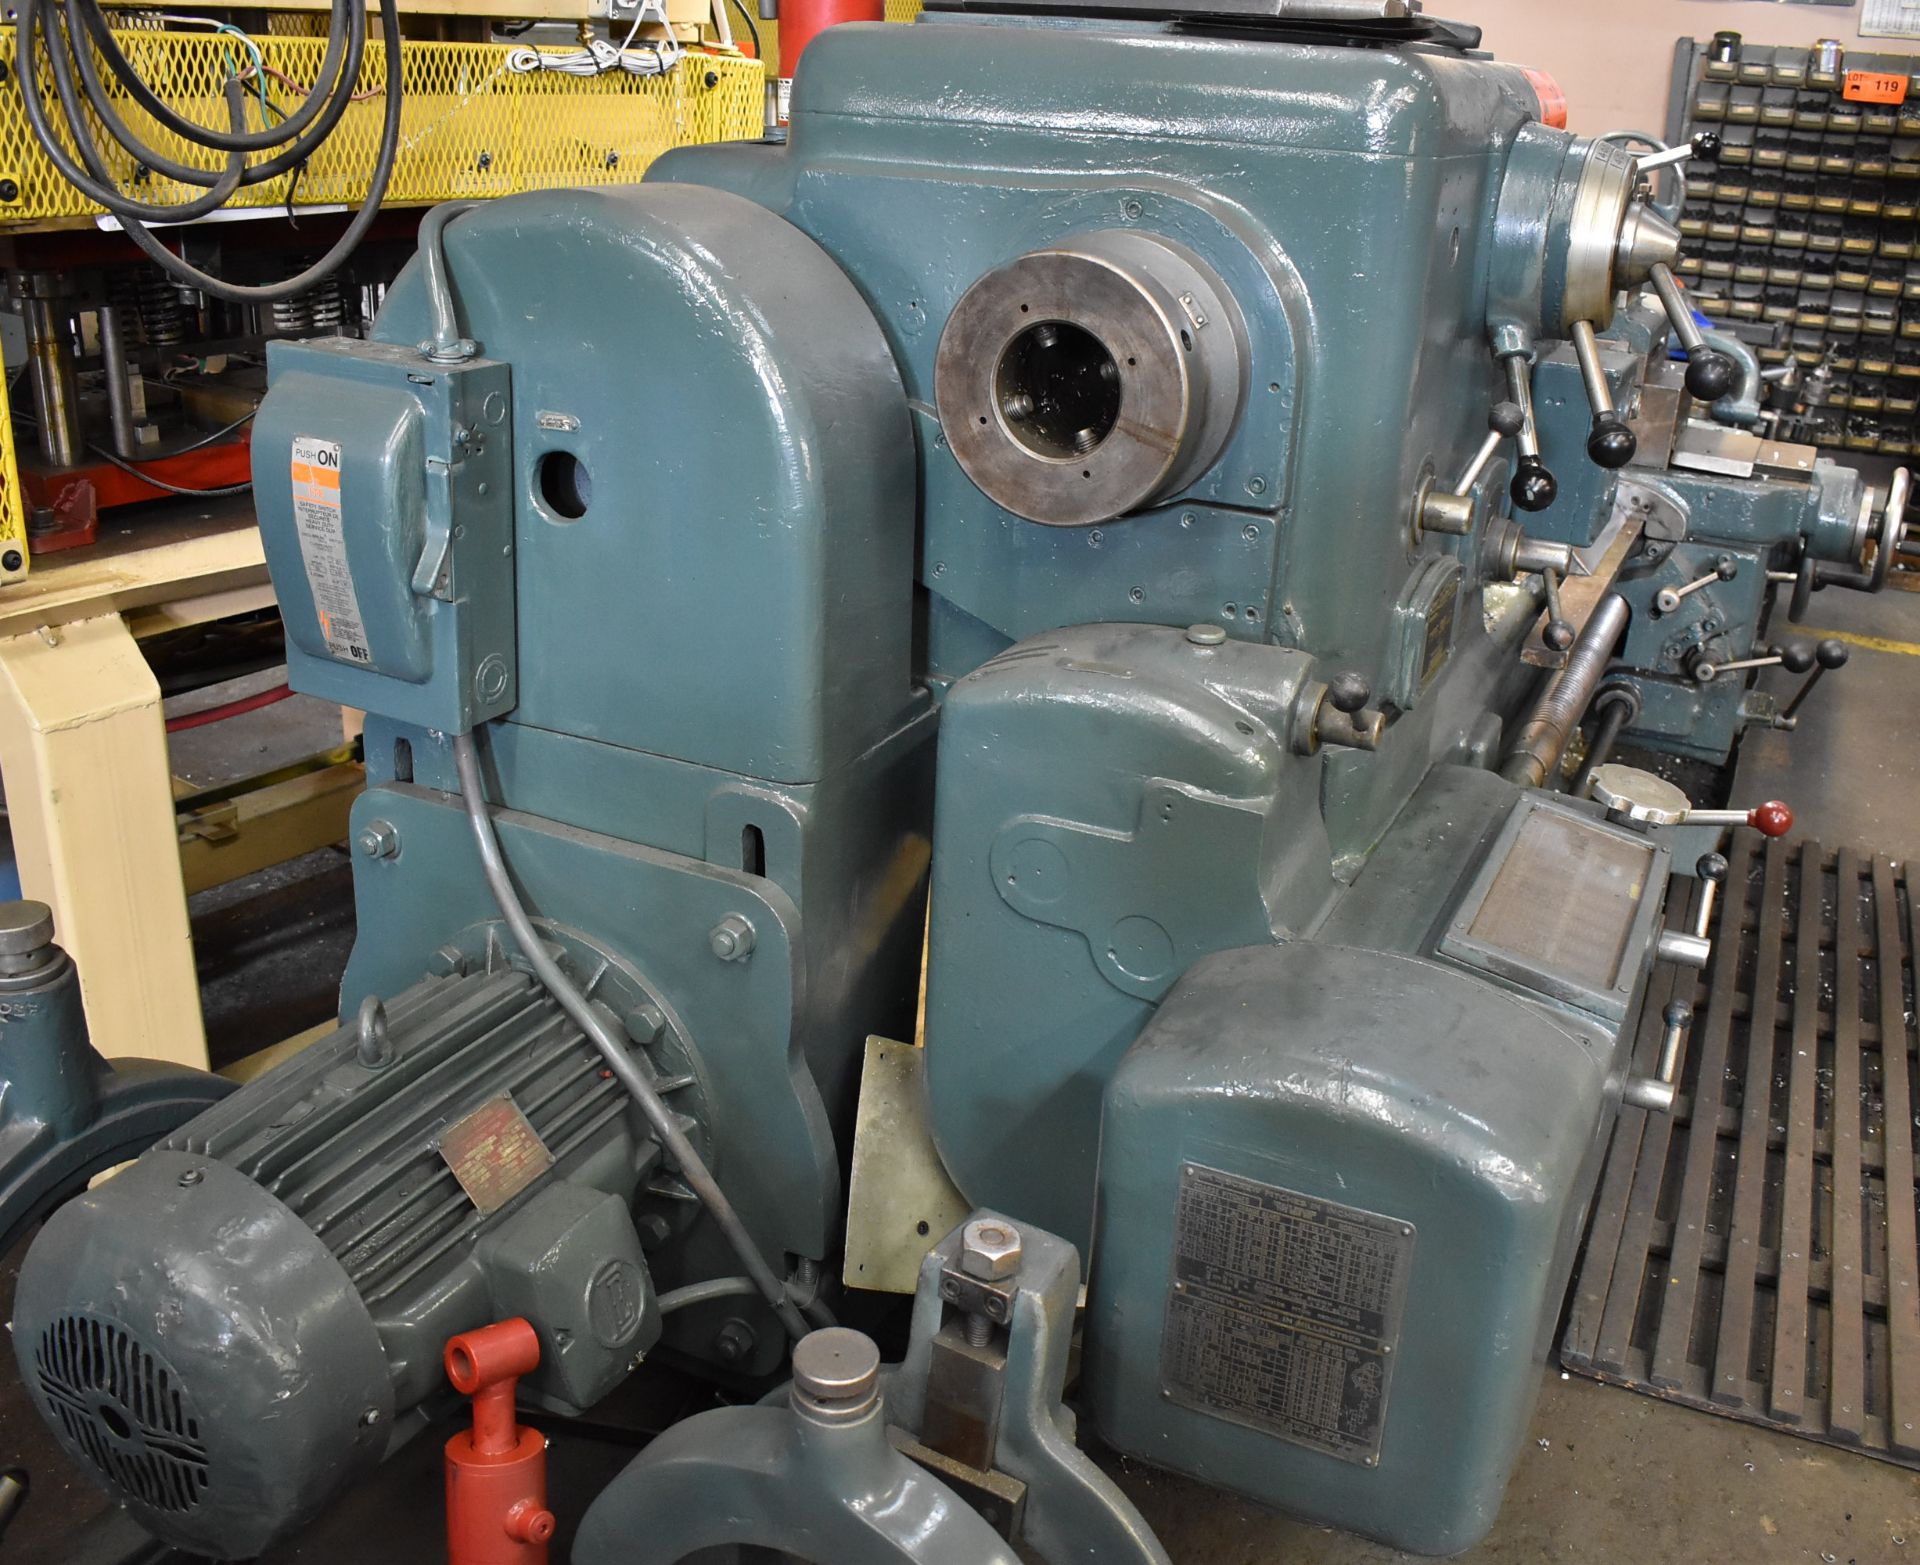 DEAN, SMITH & GRACE TYPE 30LD ENGINE LATHE WITH 30" SWING, 84" BETWEEN CENTERS, 4" SPINDLE BORE, - Image 8 of 10